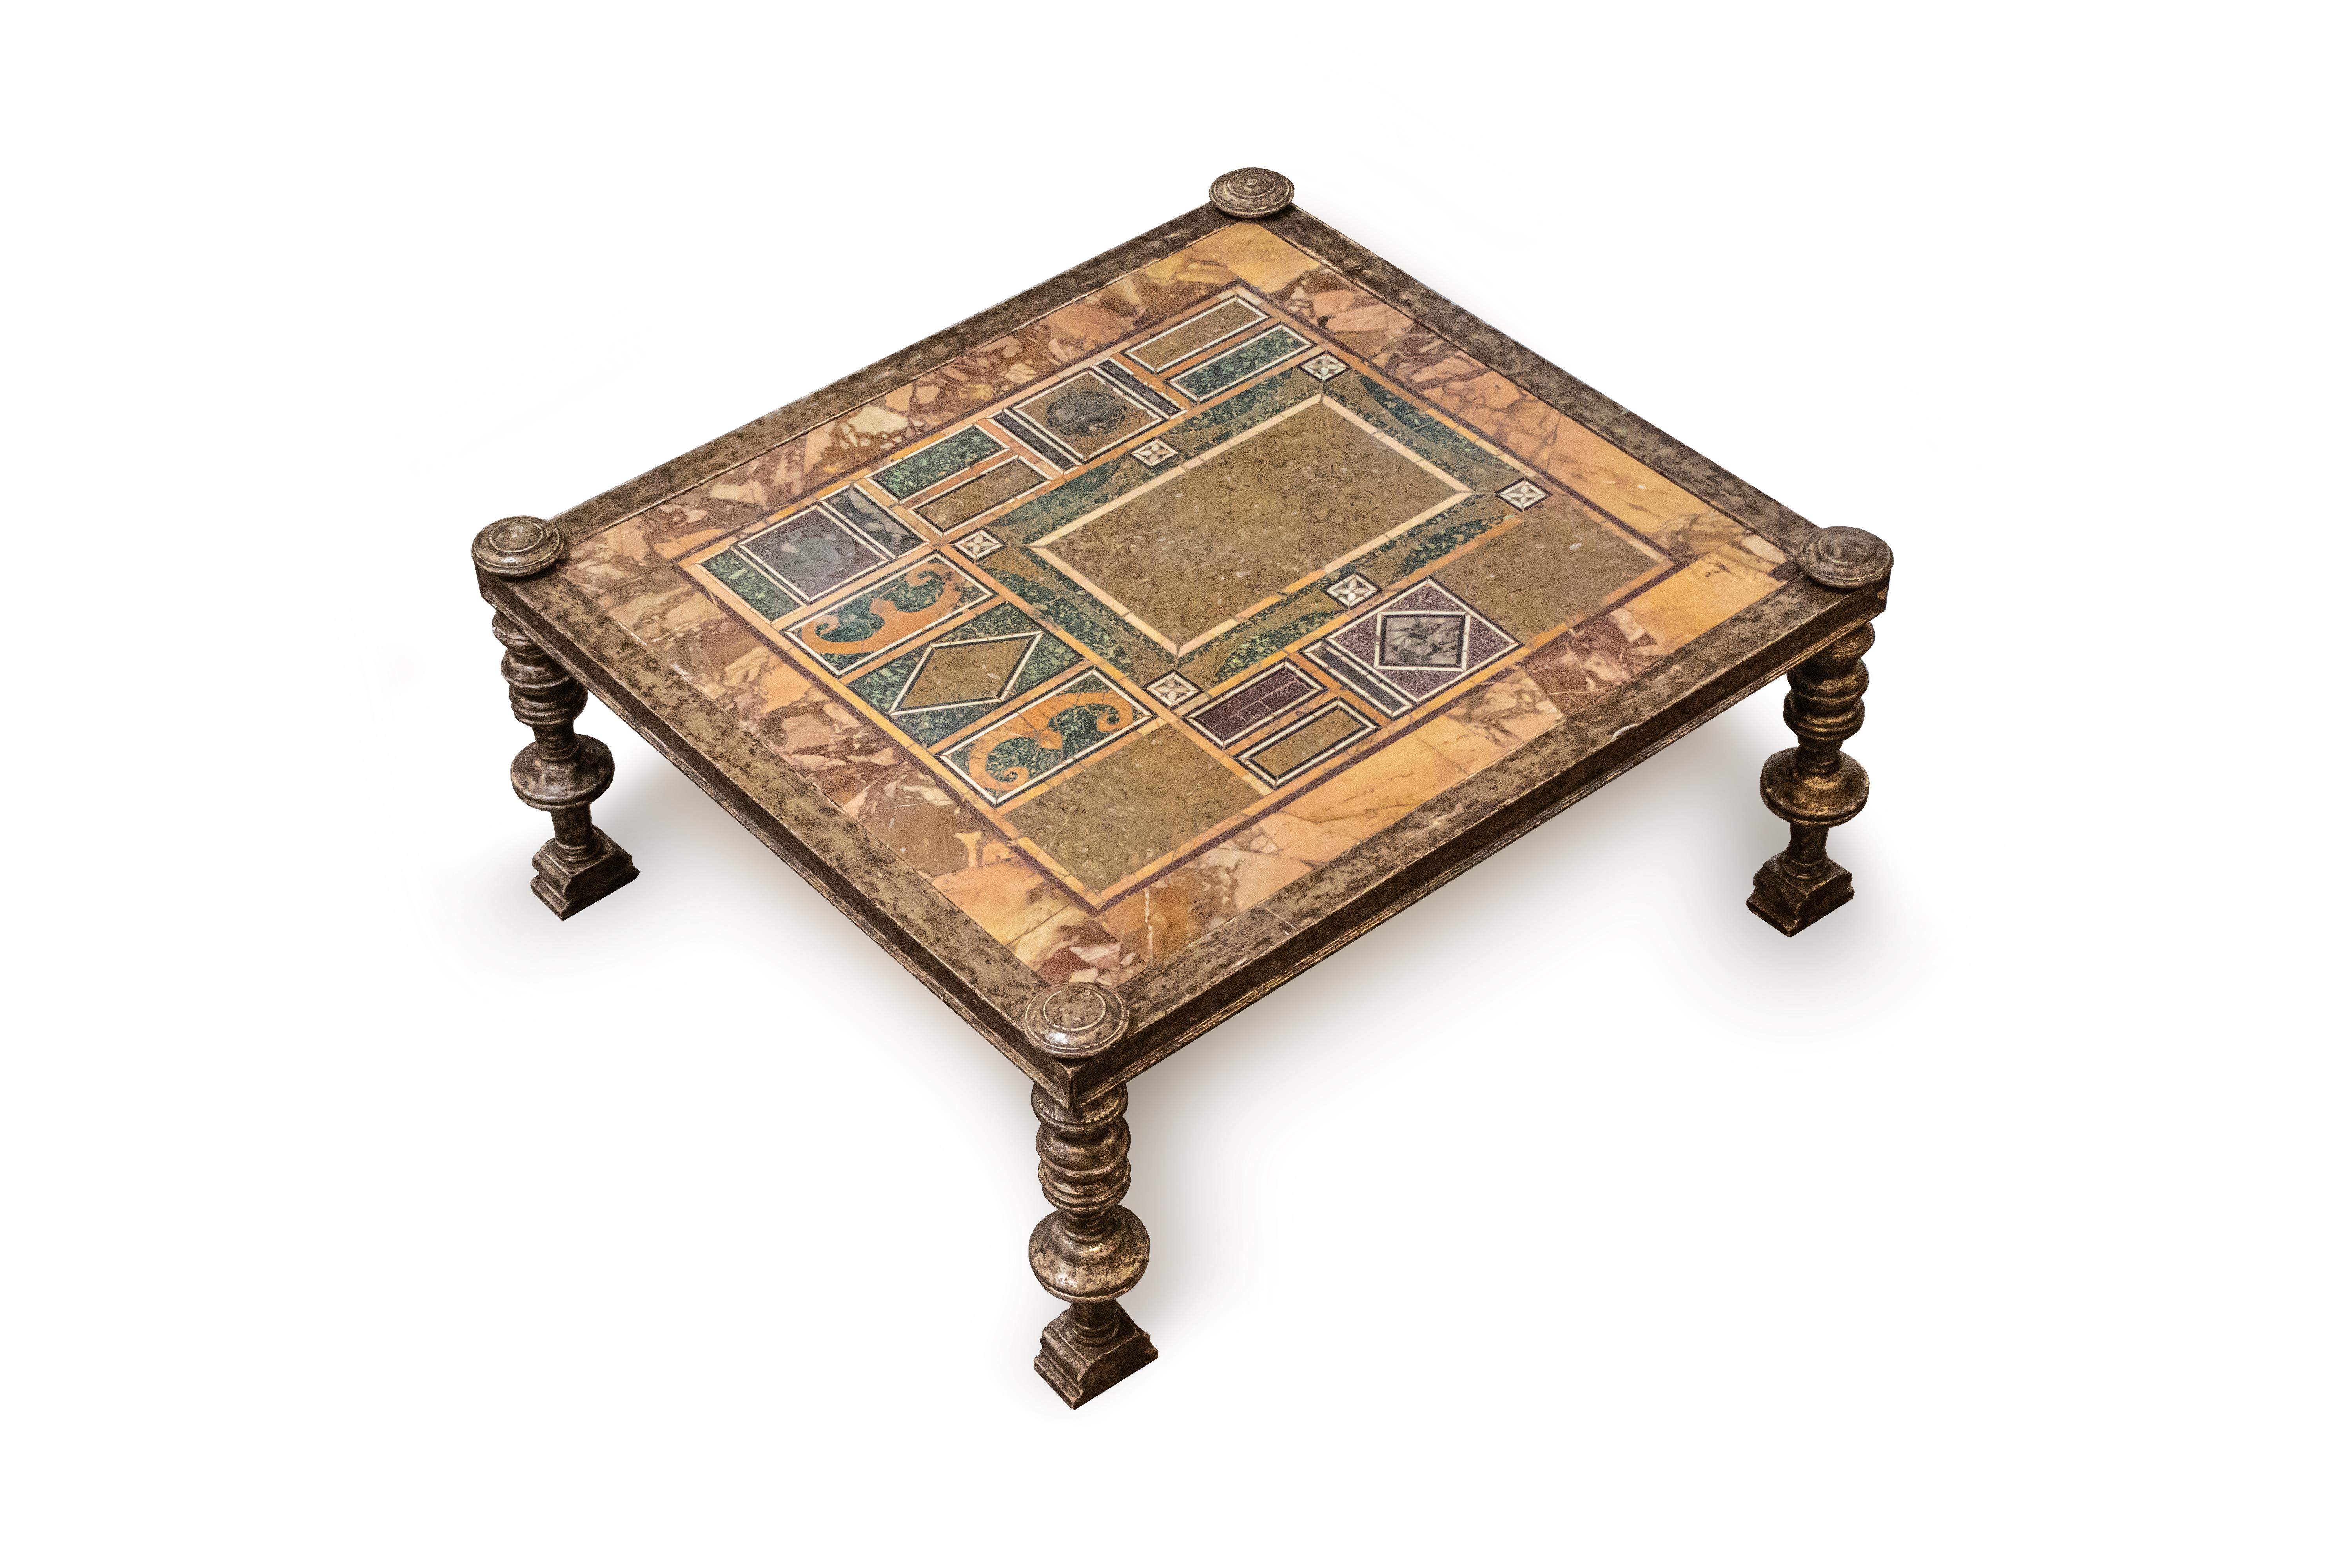 A low occasional table on silvered wood frame and carved feet. Each corner has a detachable carved ending, made of the same wood as the frame.

The rectangular tabletop is a hand-crafted marble inlaid panel. Each fragment shows different